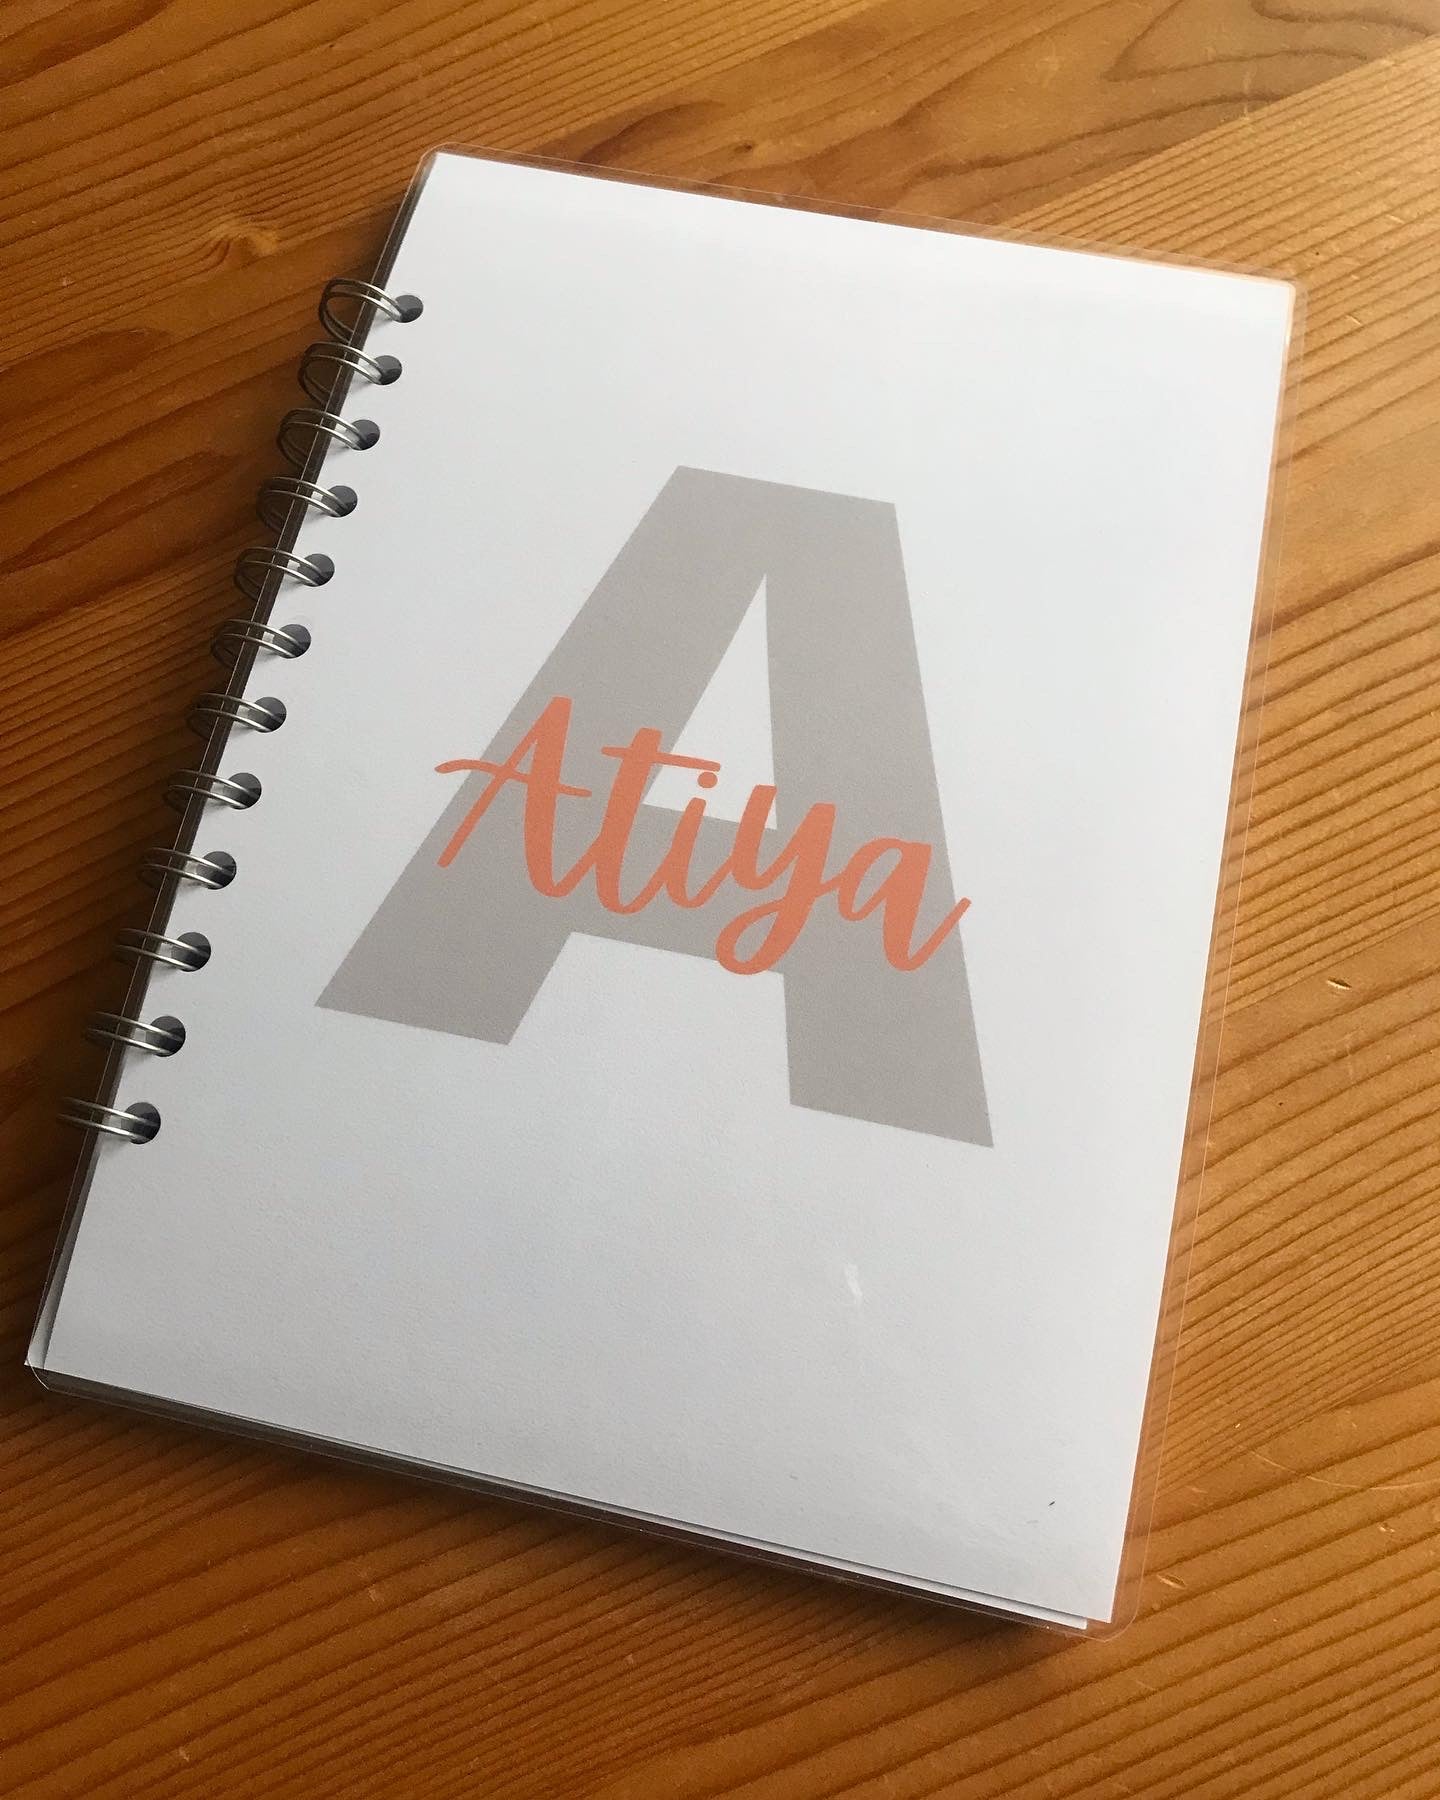 Personalised Name Notebook, Orange / Grey Design. Lined, Dotted, Grid or Plain Paper